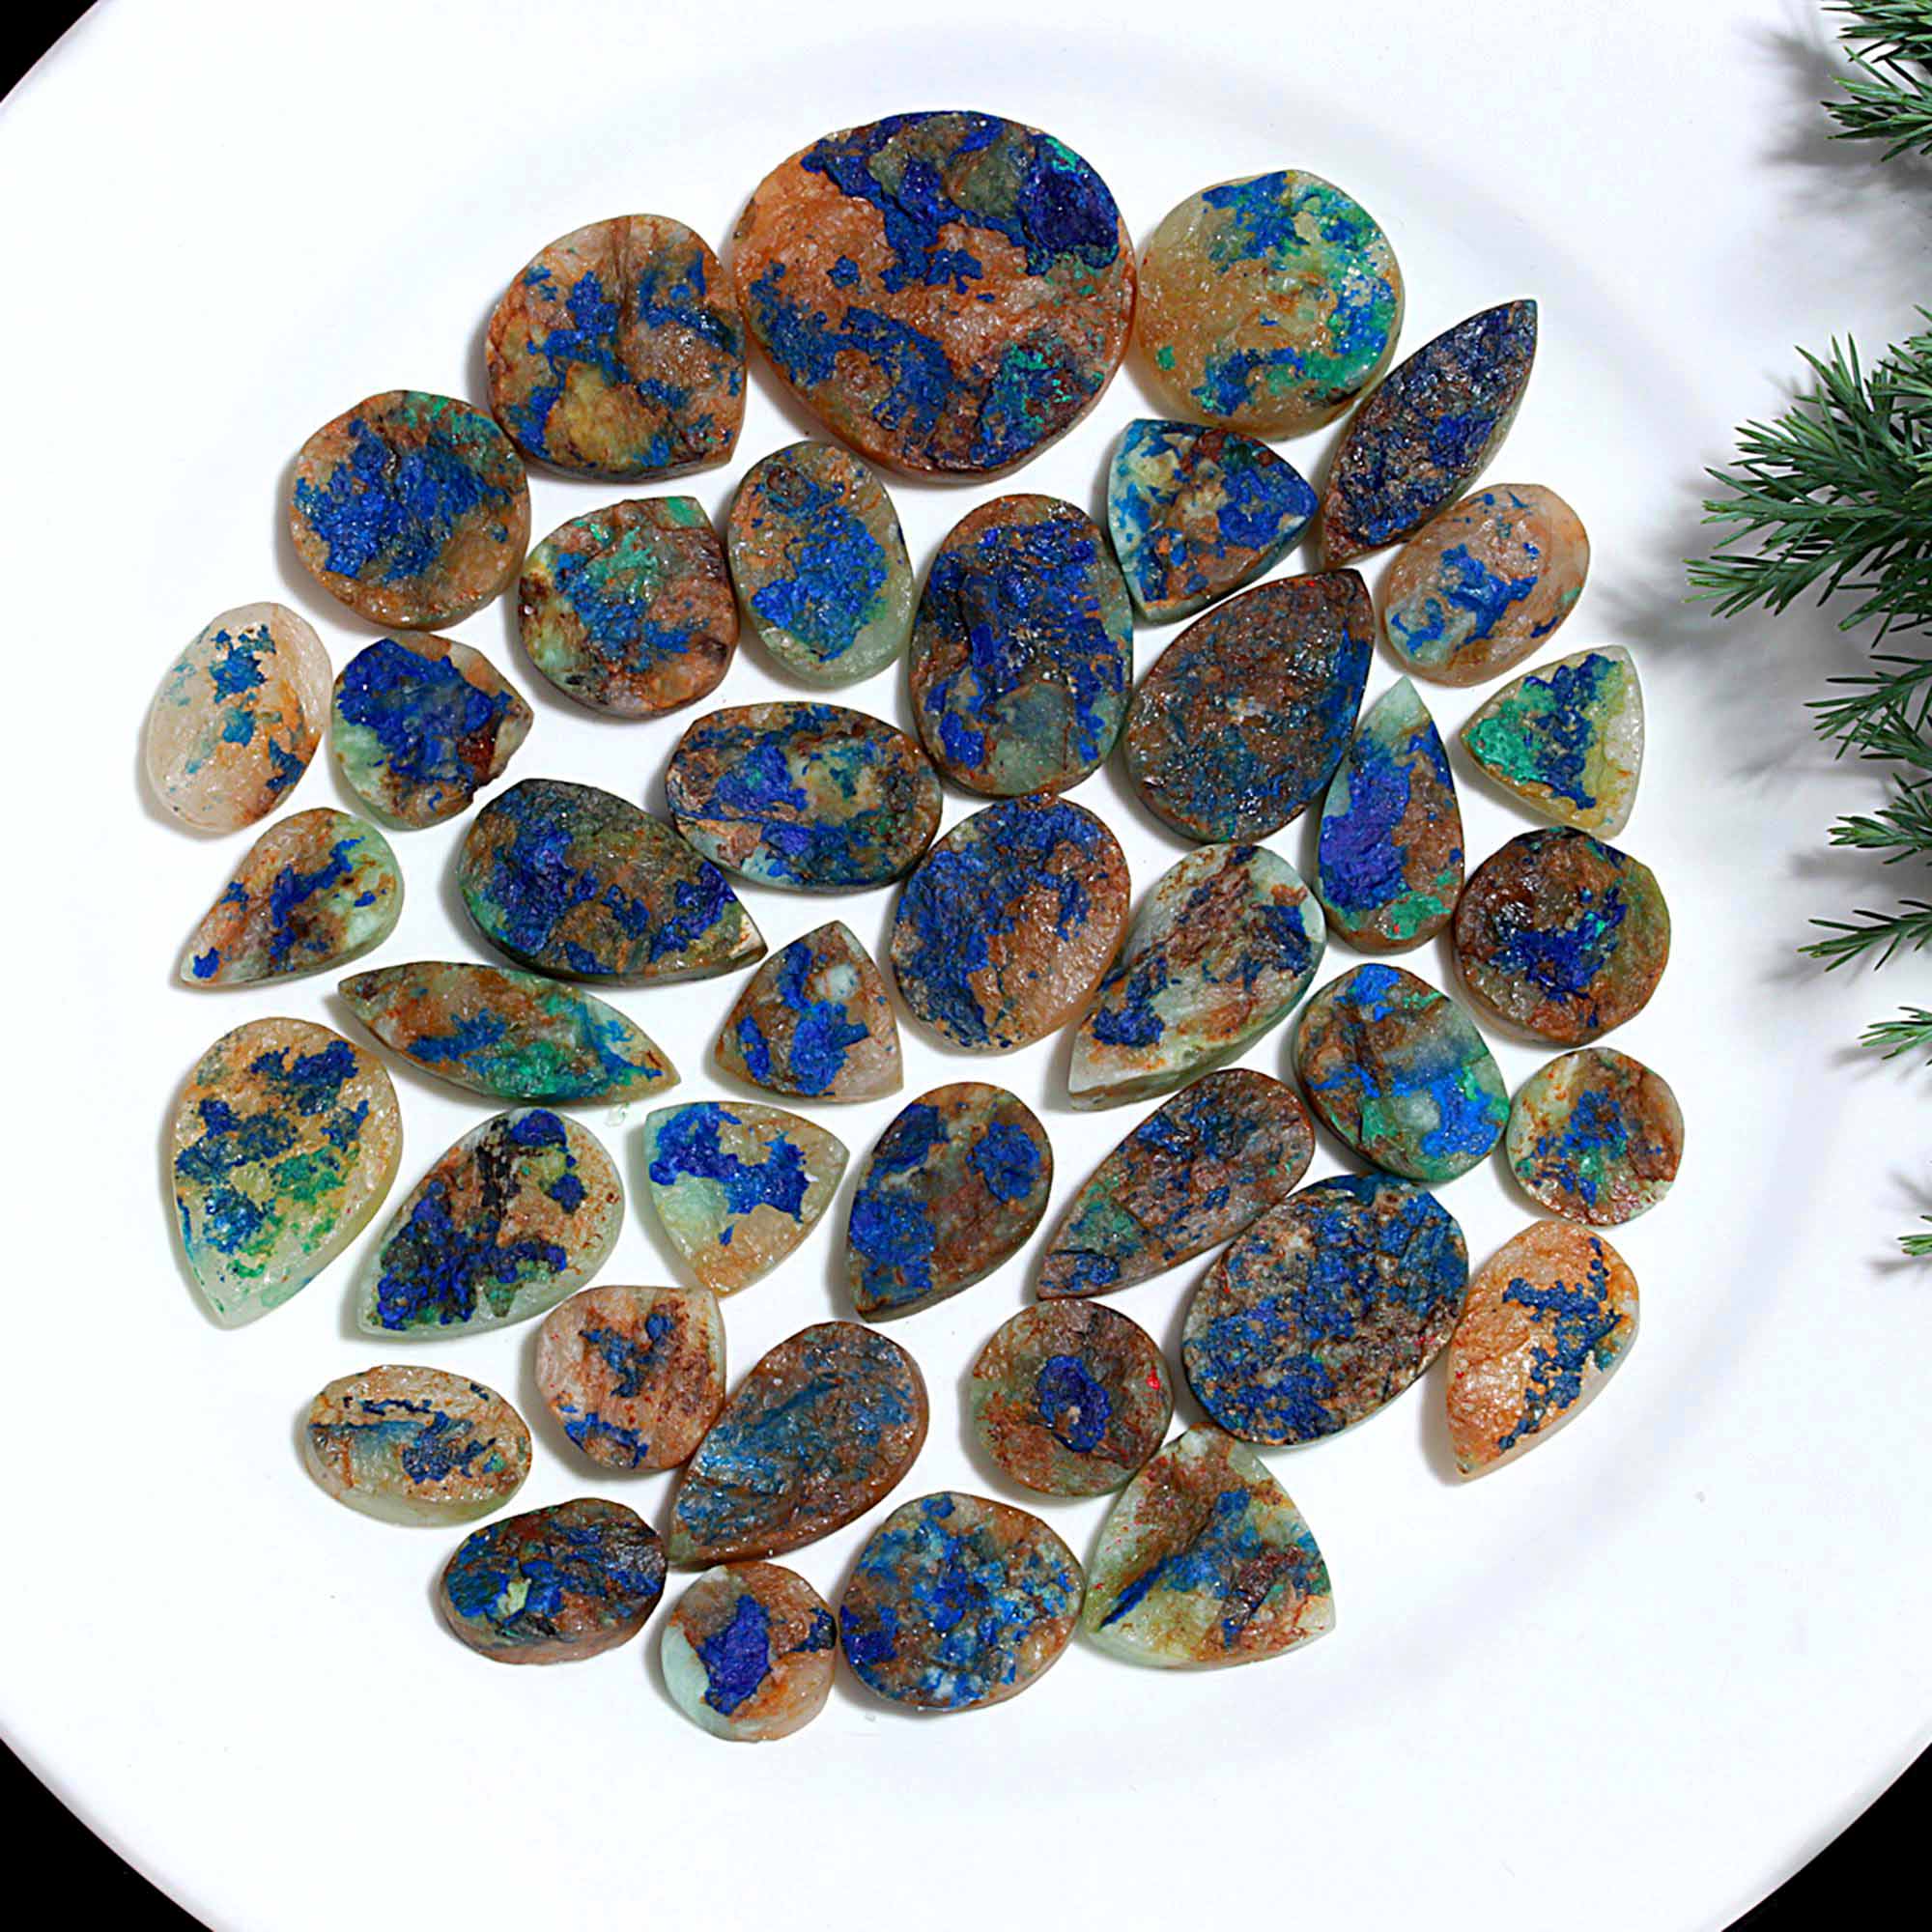 40 Pcs 552.Cts Natural Azurite Druzy Unpolished Loose Cabochon Gemstone For Jewelry Wholesale Lot Size 30x27 13x13mm